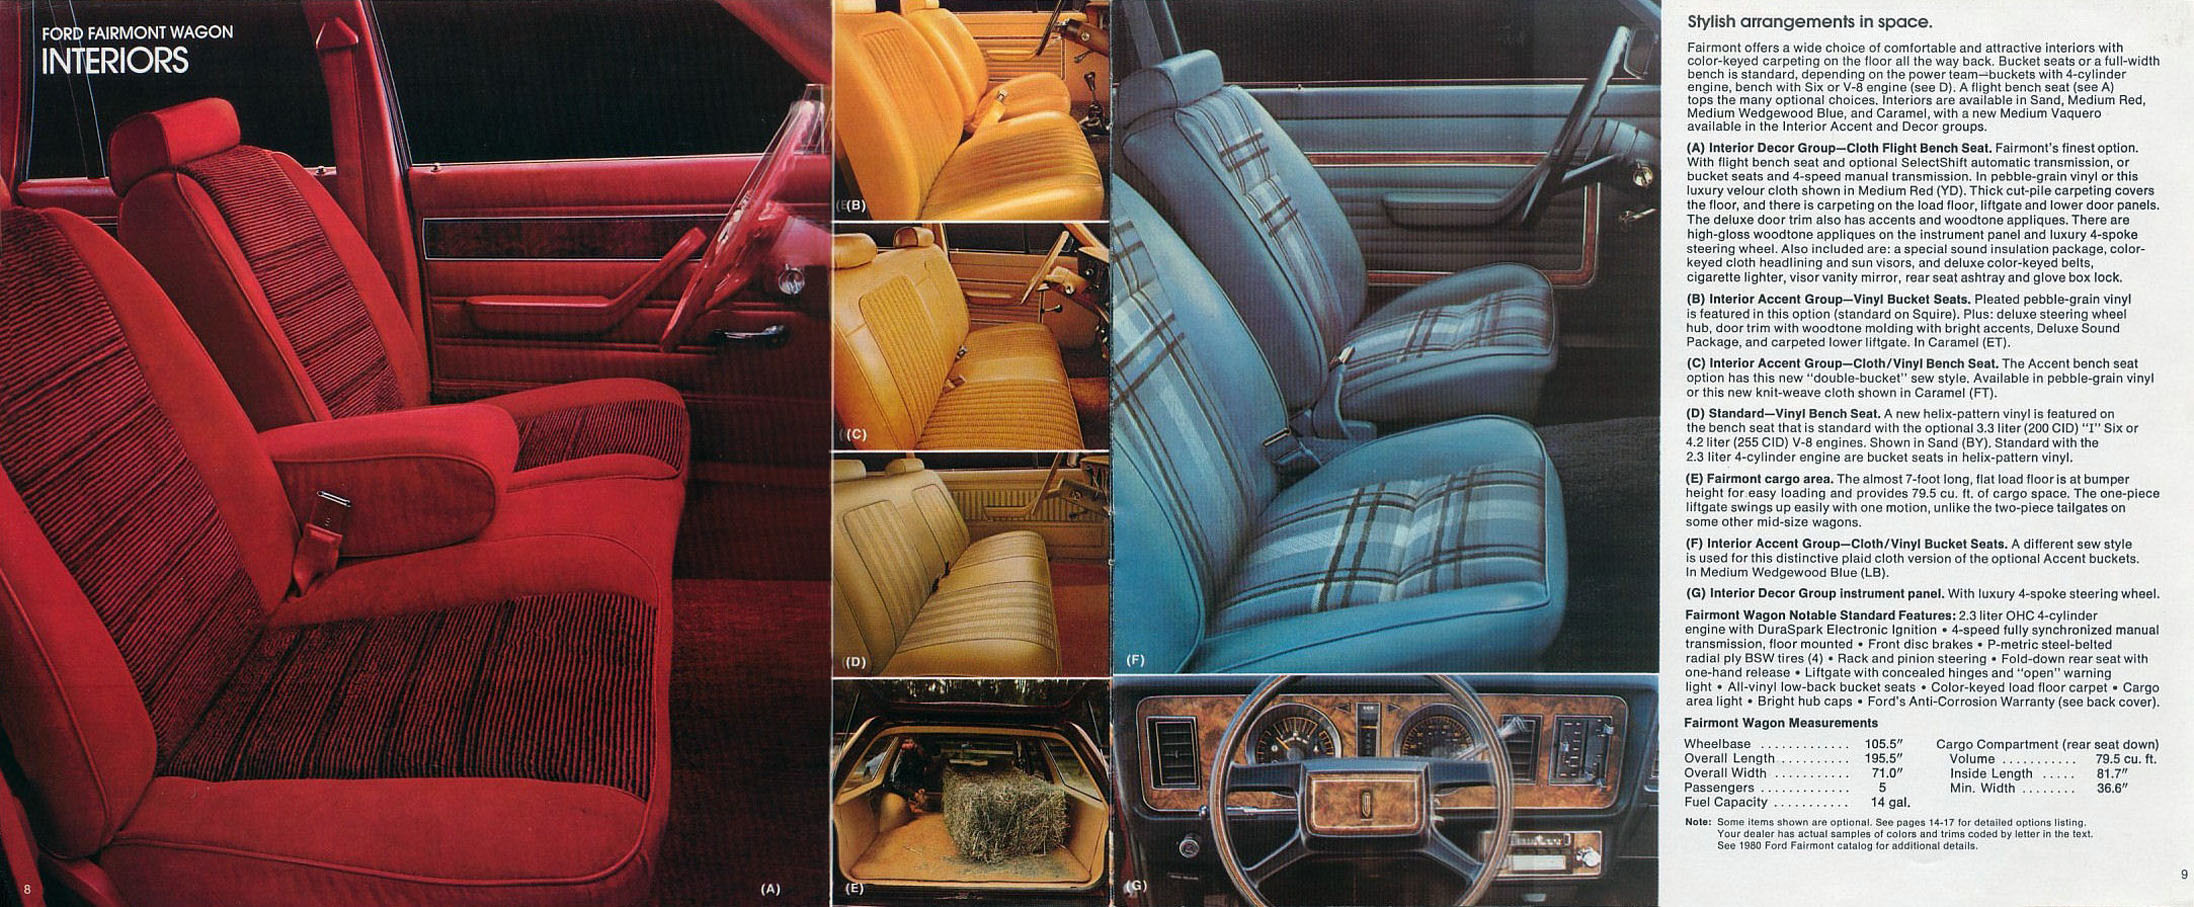 1980 Ford Wagons Brochure Page 2